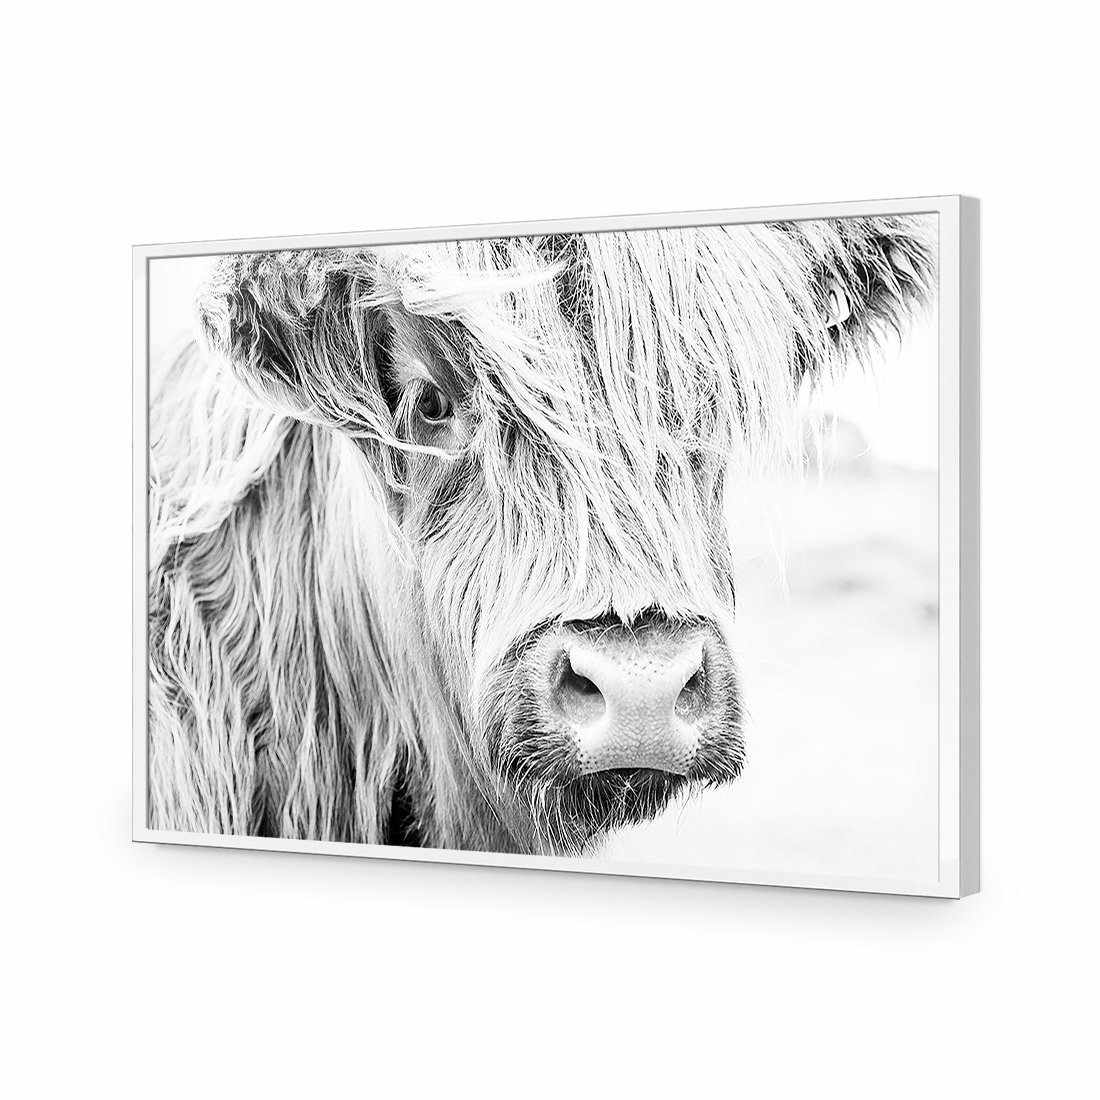 Henrietta the Highland Cow-Acrylic-Wall Art Design-Without Border-Acrylic - White Frame-45x30cm-Wall Art Designs